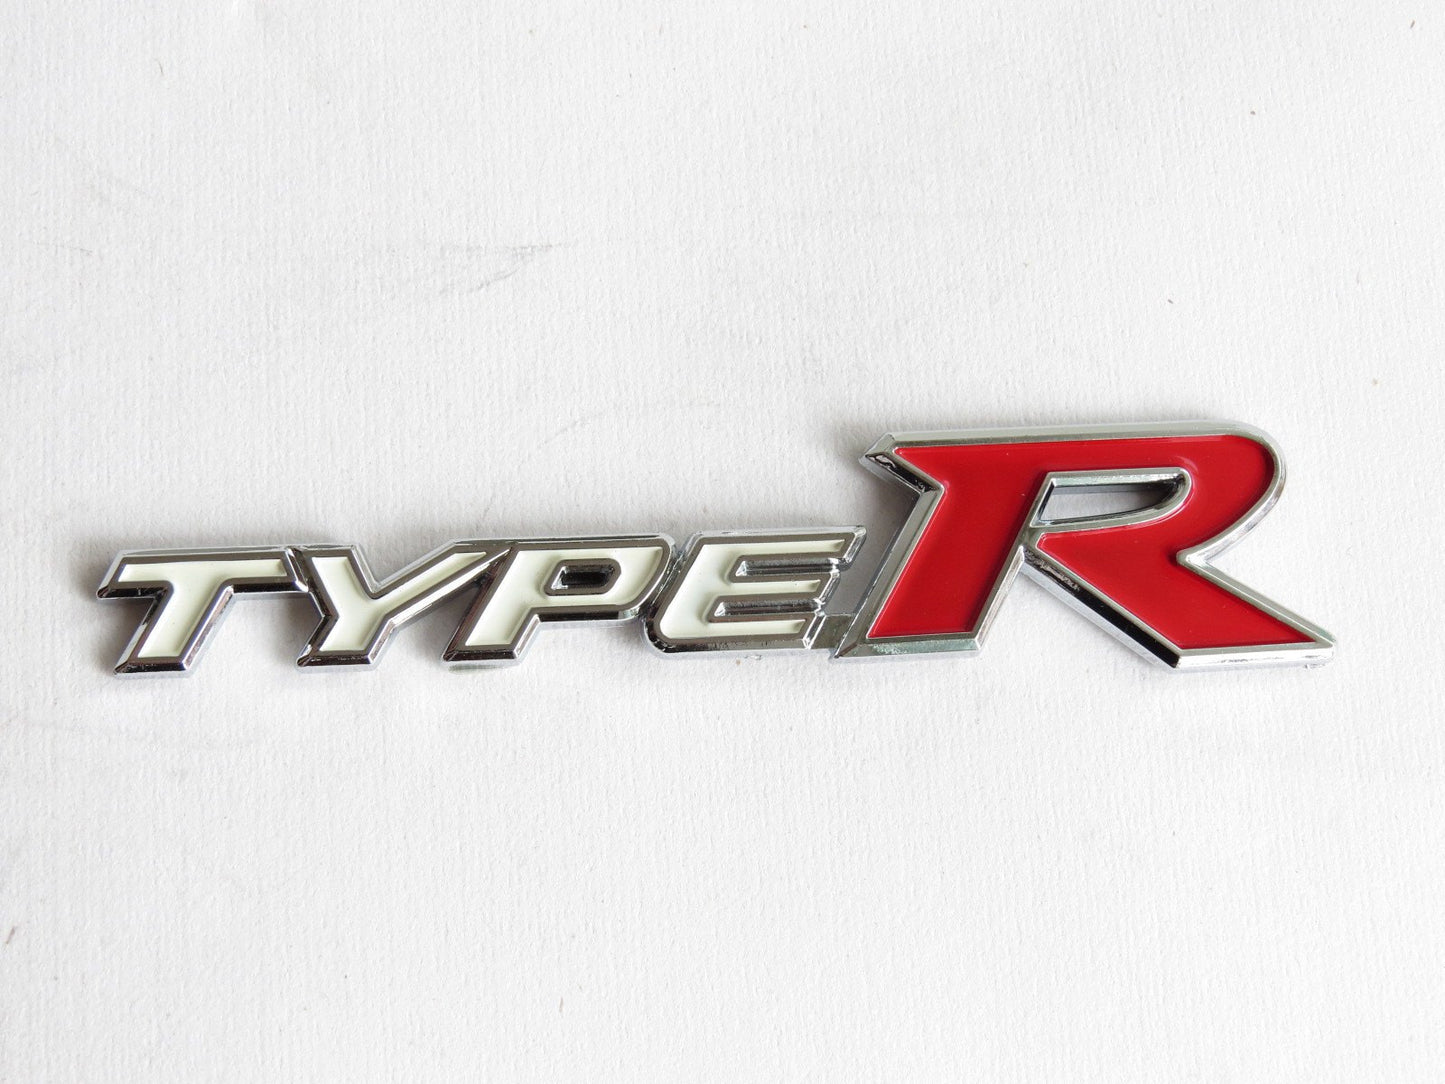 New Red & Silver "TYPE-R" Chrome Plastic Emblem Badge for Honda - Pinalloy Online Auto Accessories Lightweight Car Kit 